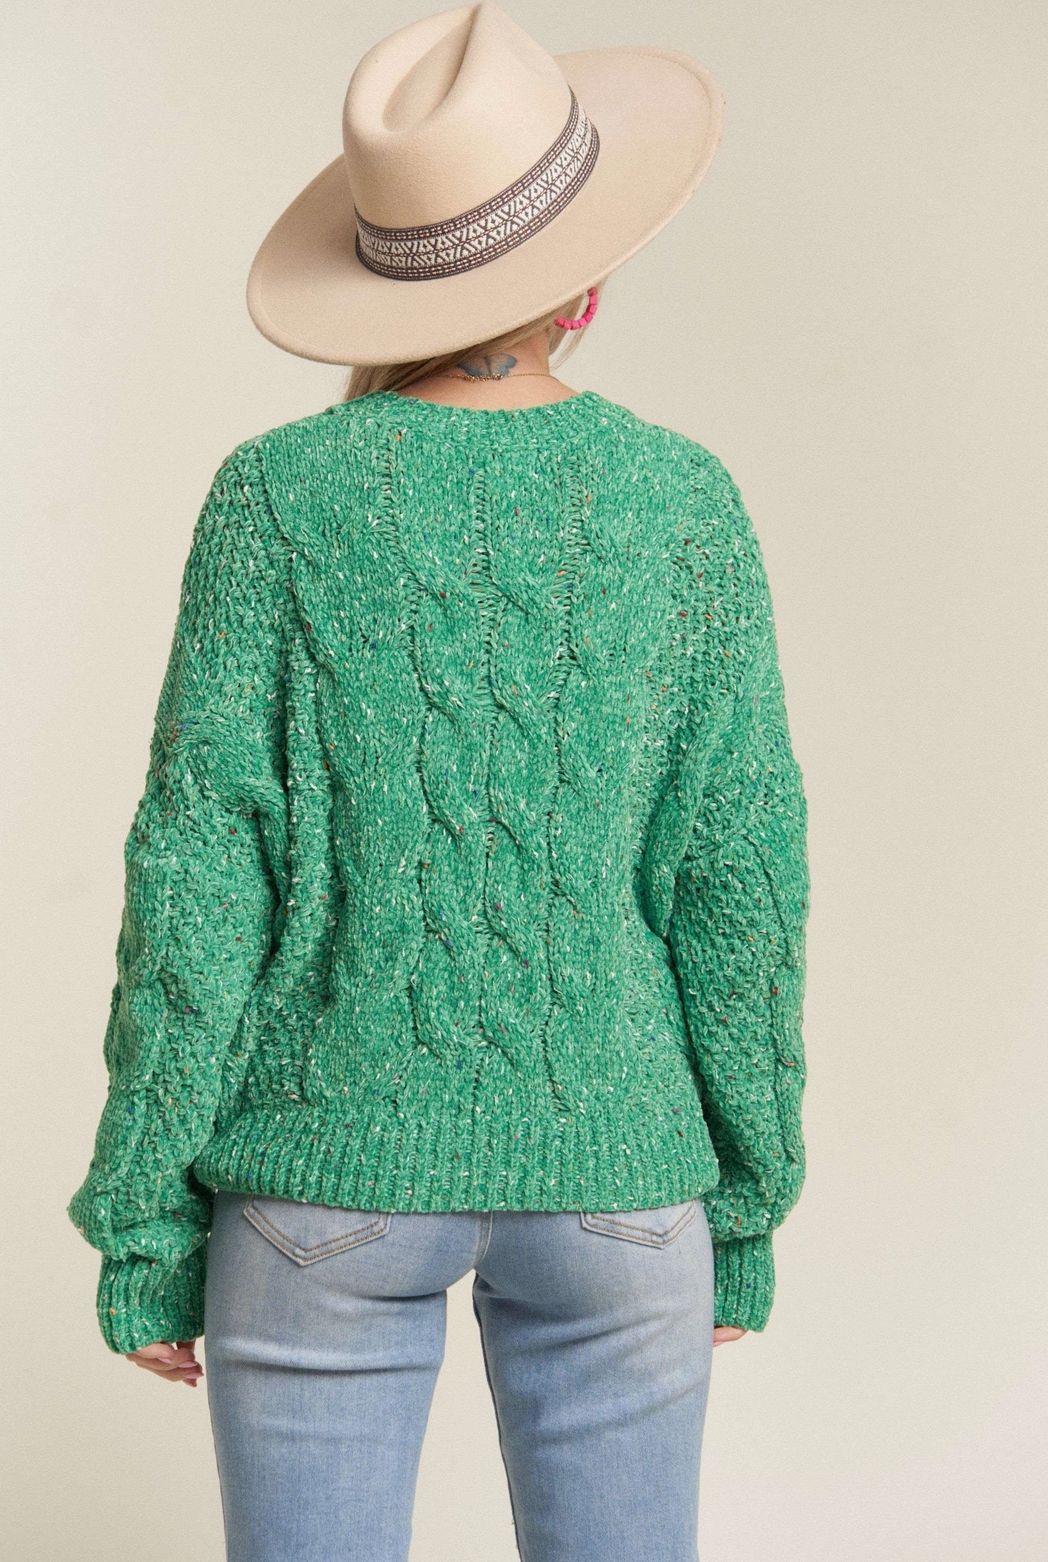 Plus Lucky Cable Knit Sweater